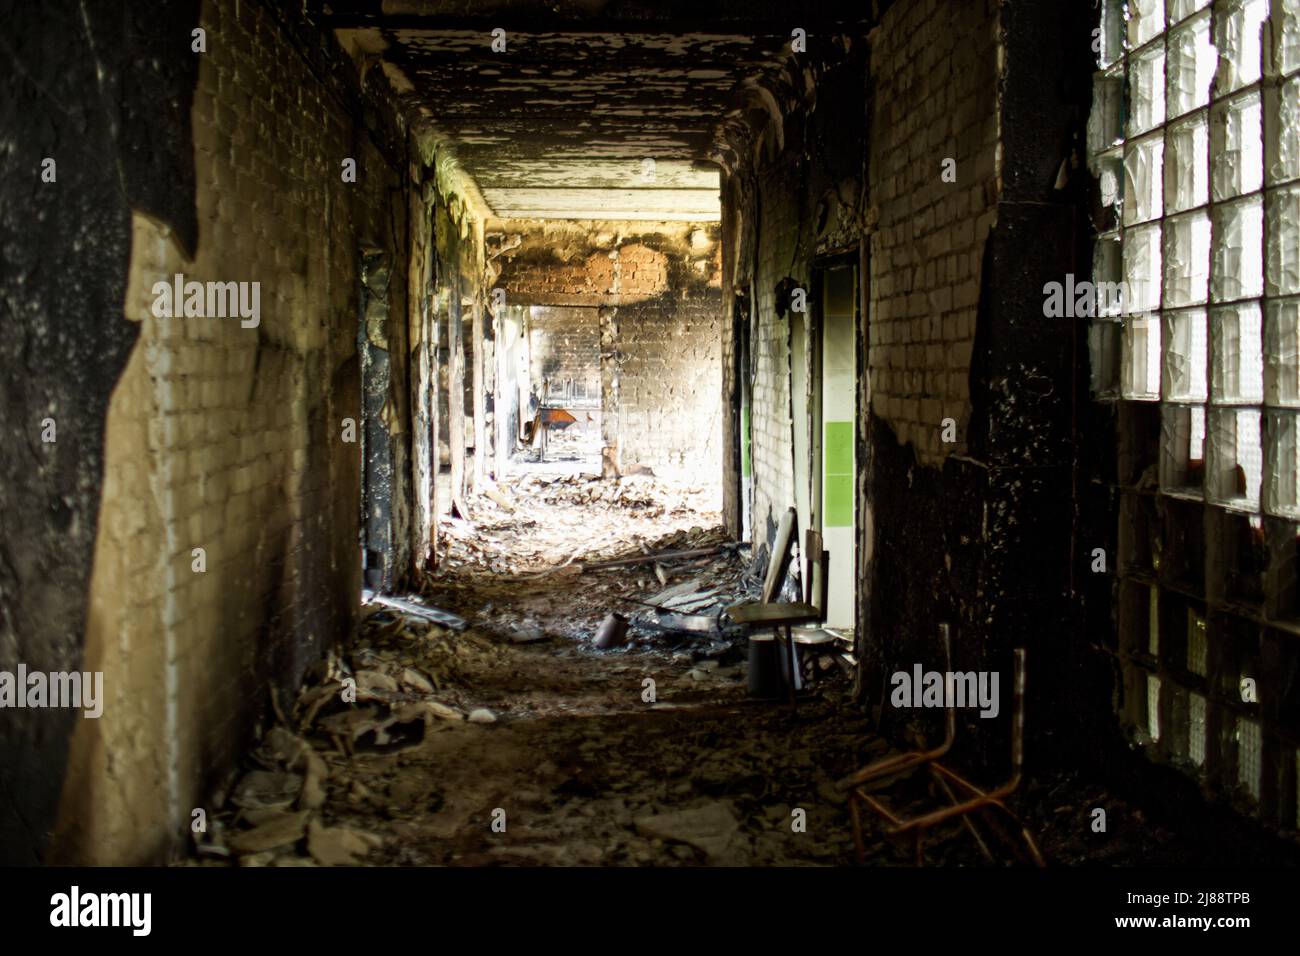 Ukraine. 13th May, 2022. The interior of the Vil'khivka school, completely destroyed by artillery shells, site of battle between Russian and Ukrainian soldiers. Russia invaded Ukraine on 24 February 2022, triggering the largest military attack in Europe since World War II. Credit: SOPA Images Limited/Alamy Live News Credit: SOPA Images Limited/Alamy Live News Stock Photo